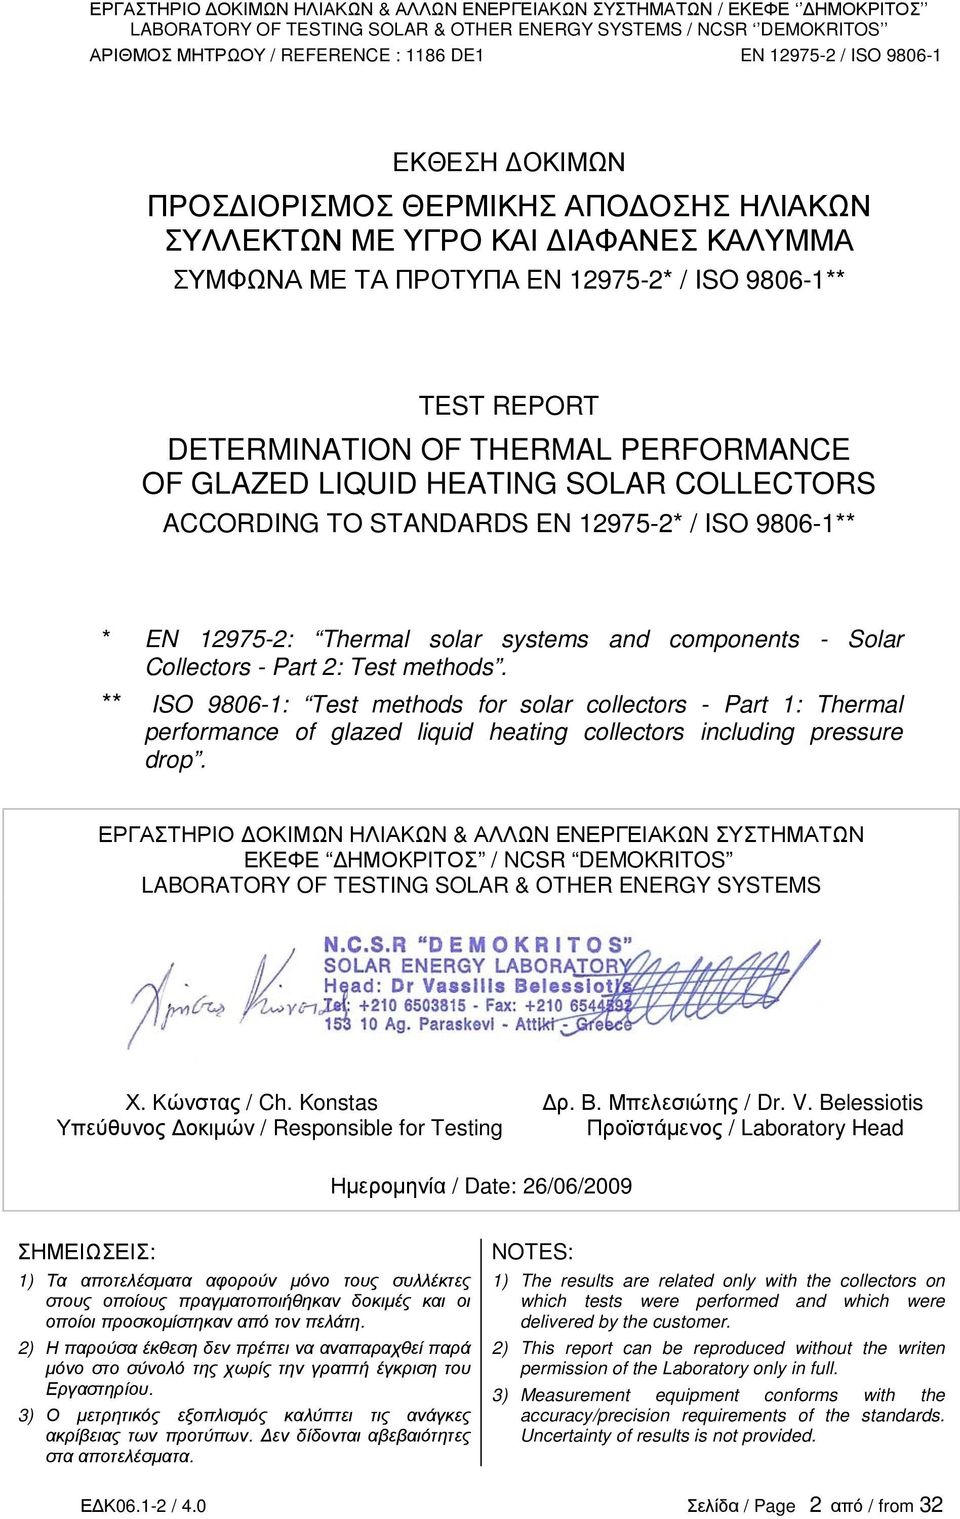 ** ISO 9806-1: Tes mehods for solar collecors - Par 1: Thermal performance of glazed liquid heaing collecors including pressure drop.